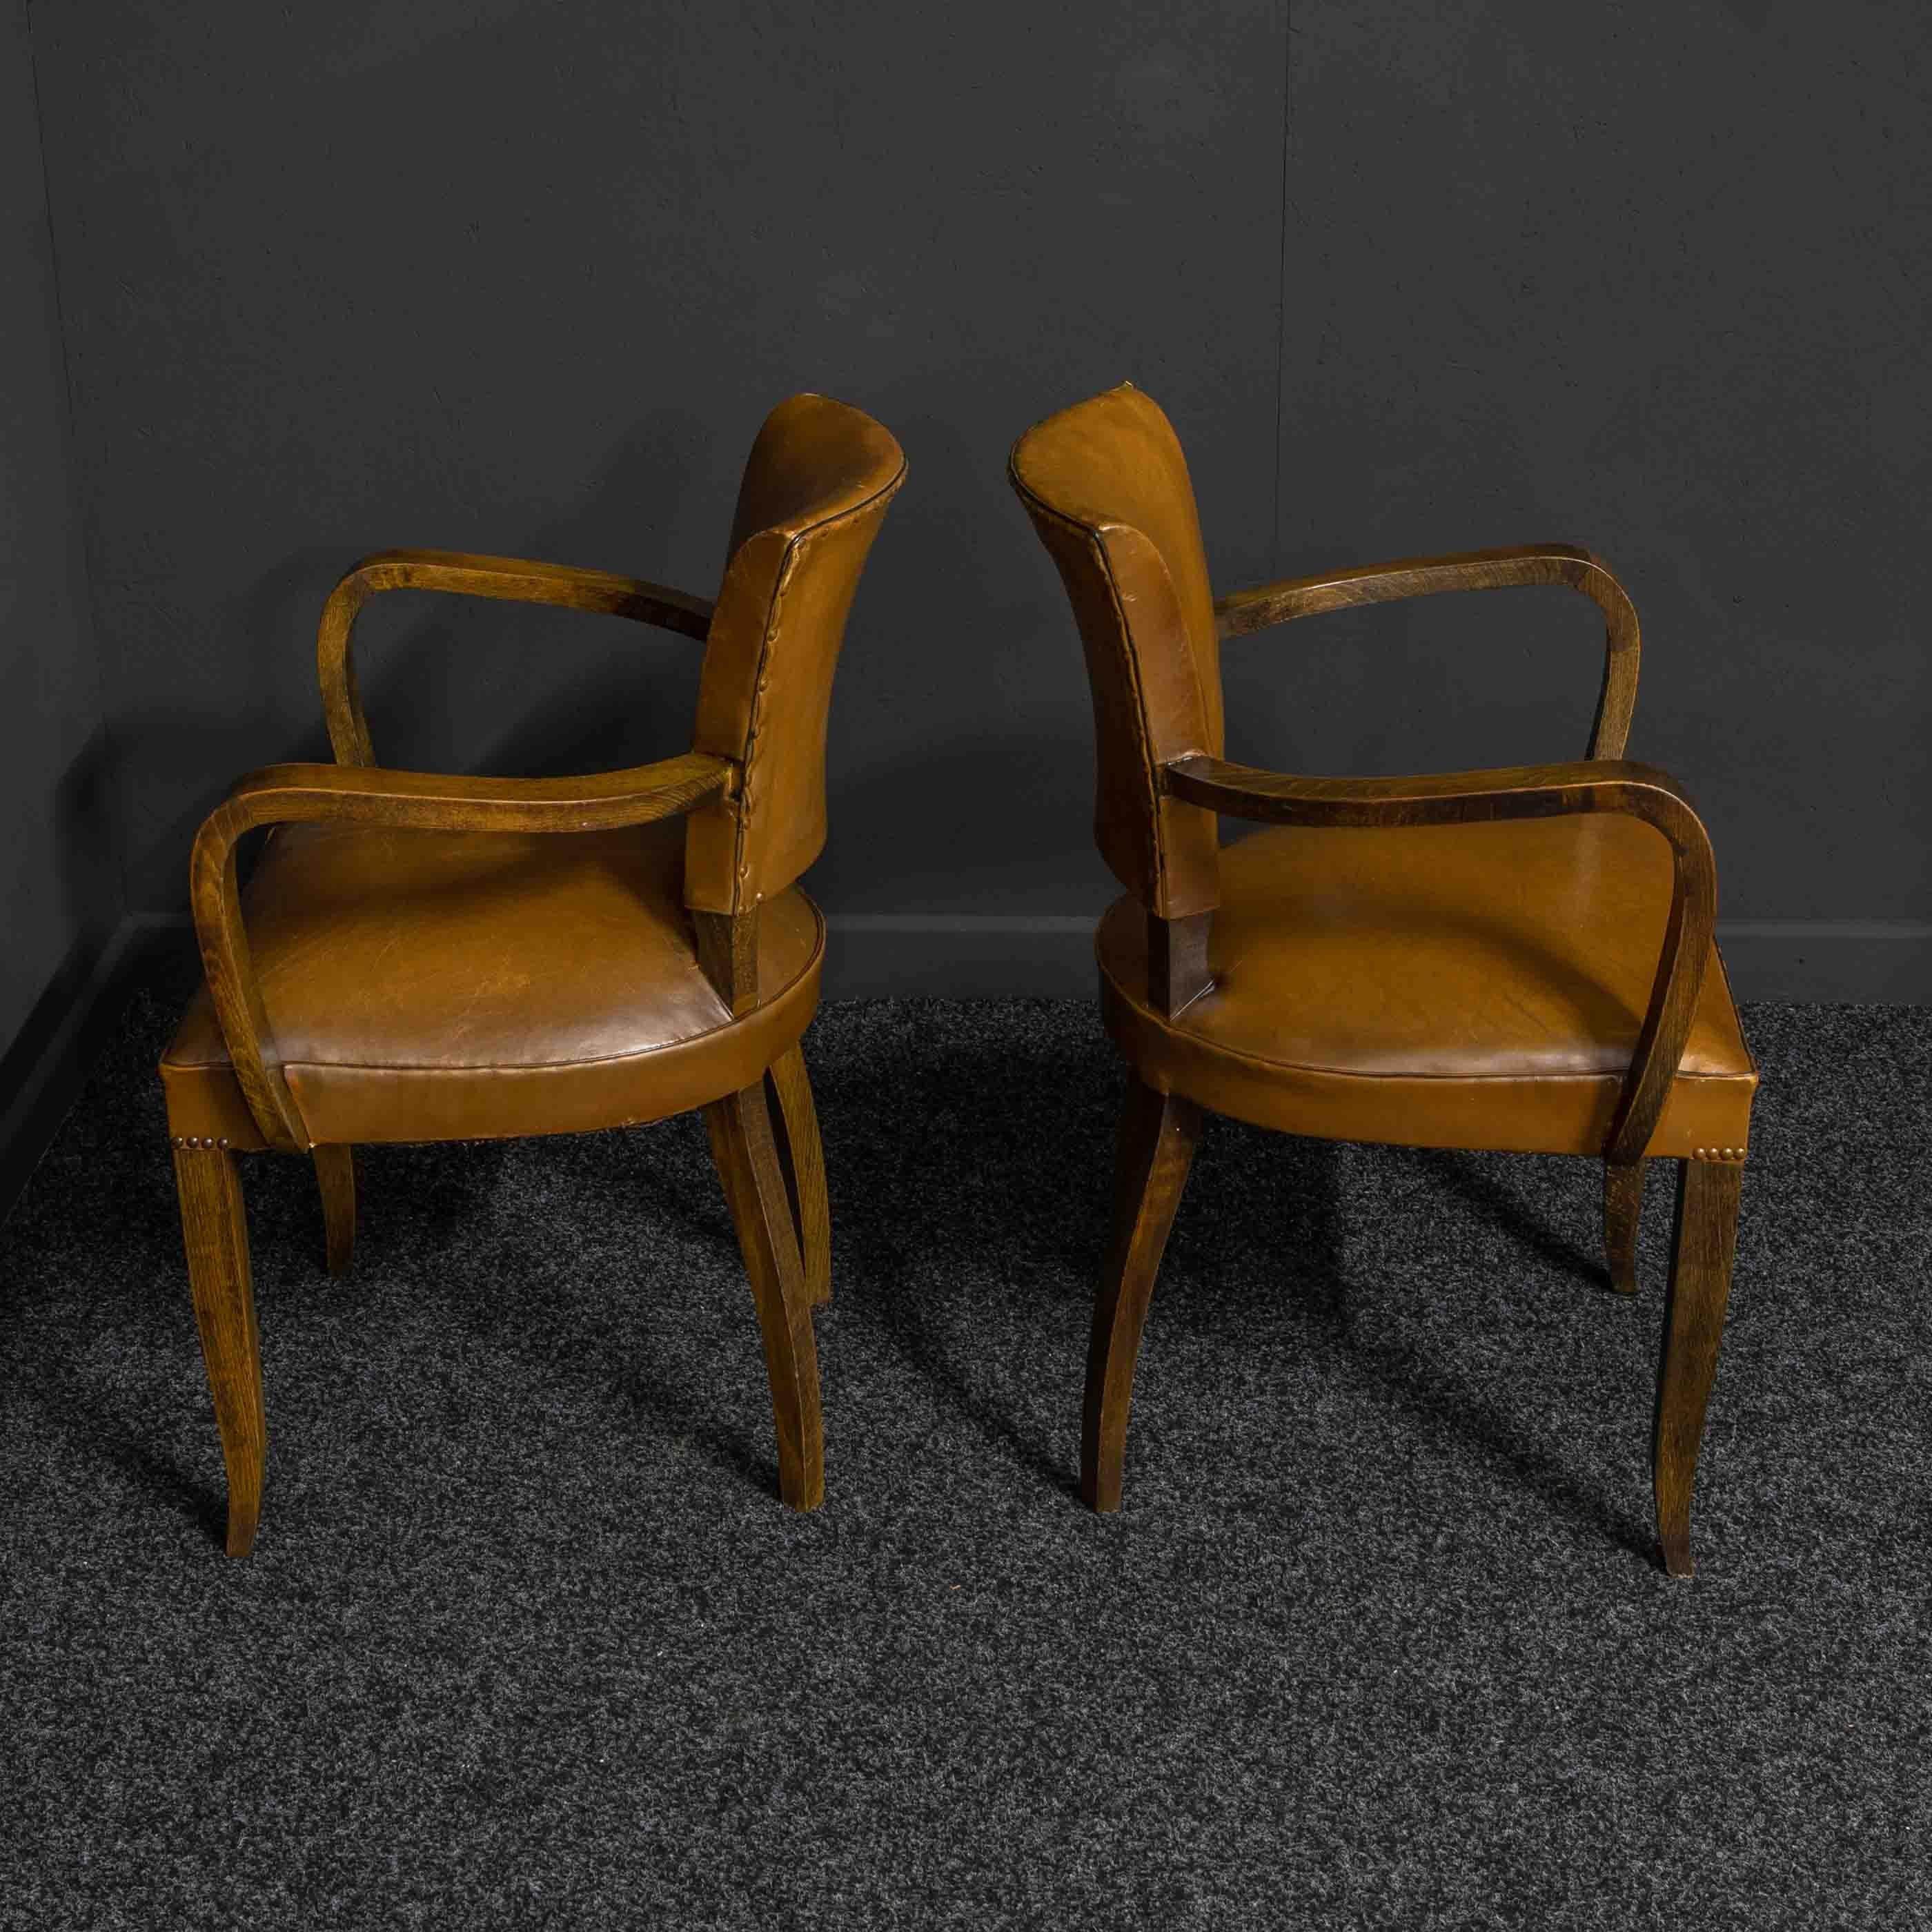 French Pair of Art Deco Chairs by OXEDOU